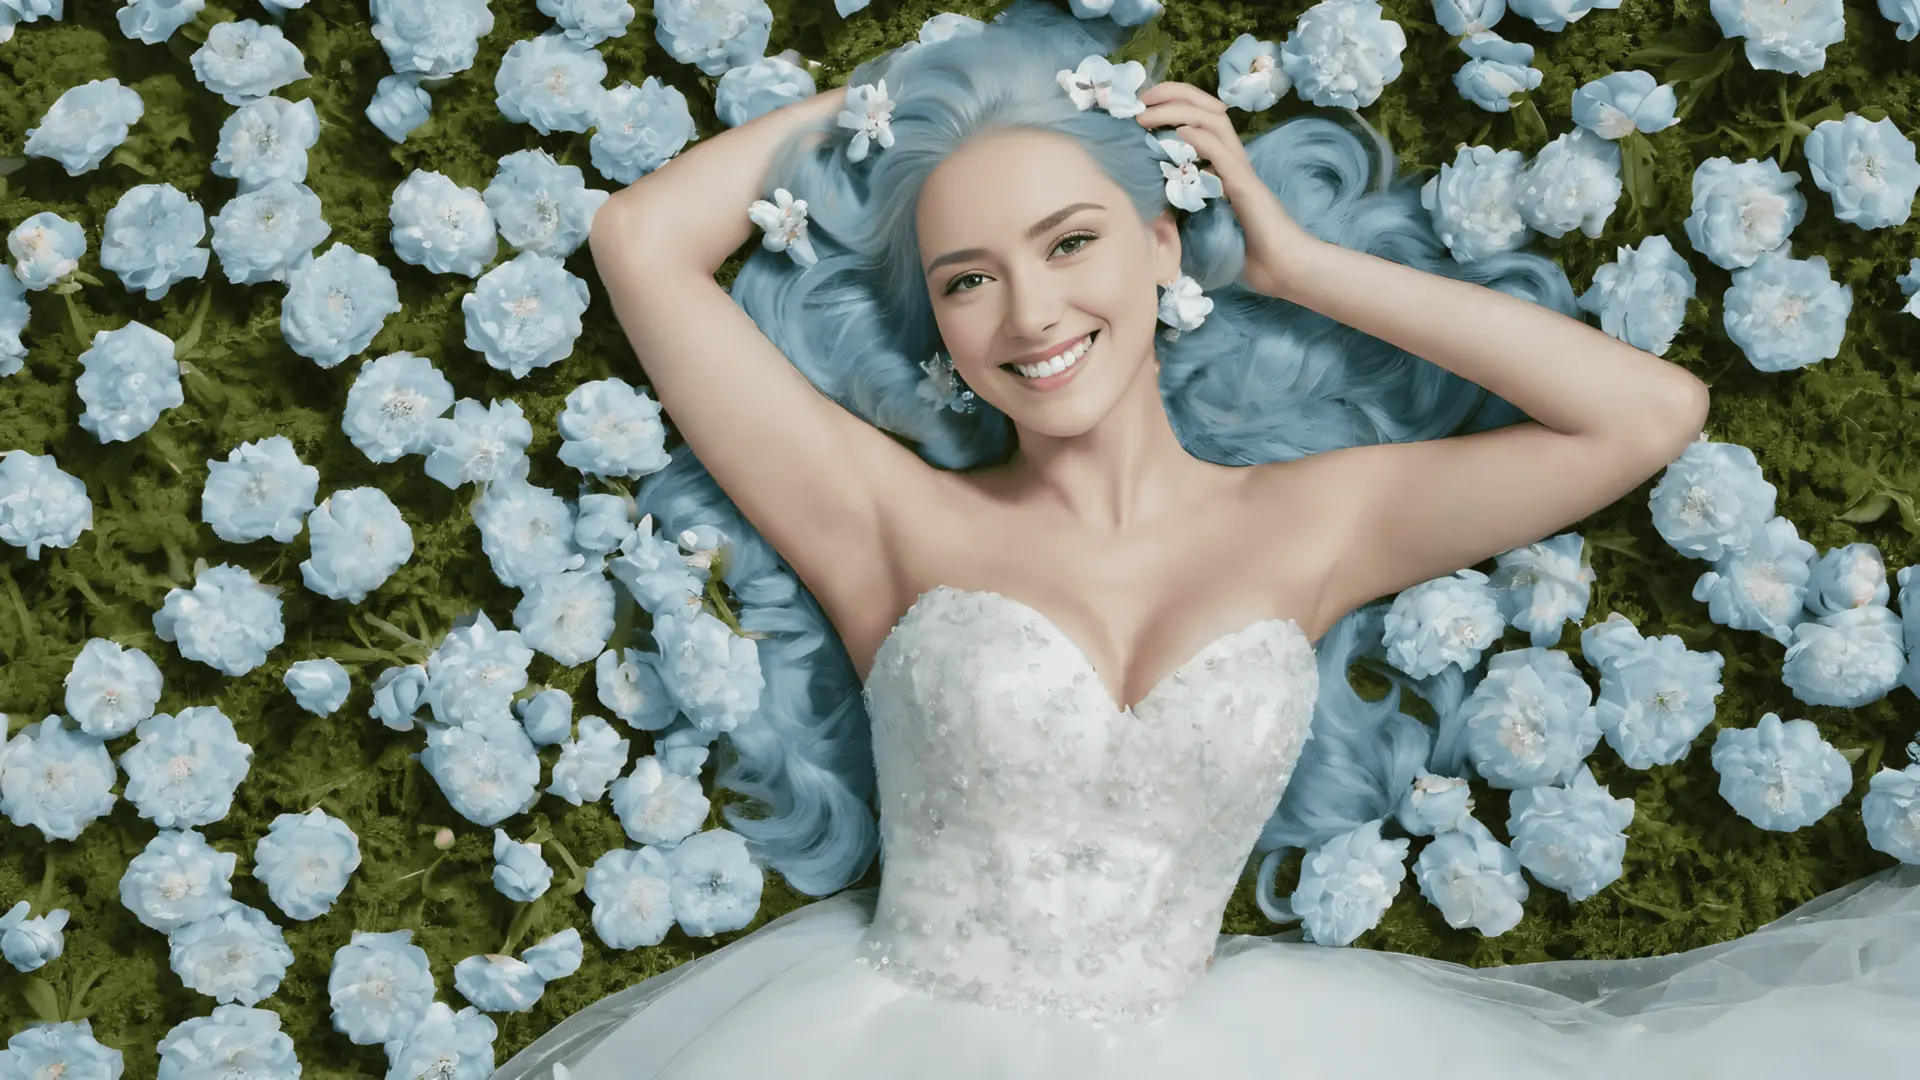 AI-generated image of a blue-haired woman lying in a bed of flowers.